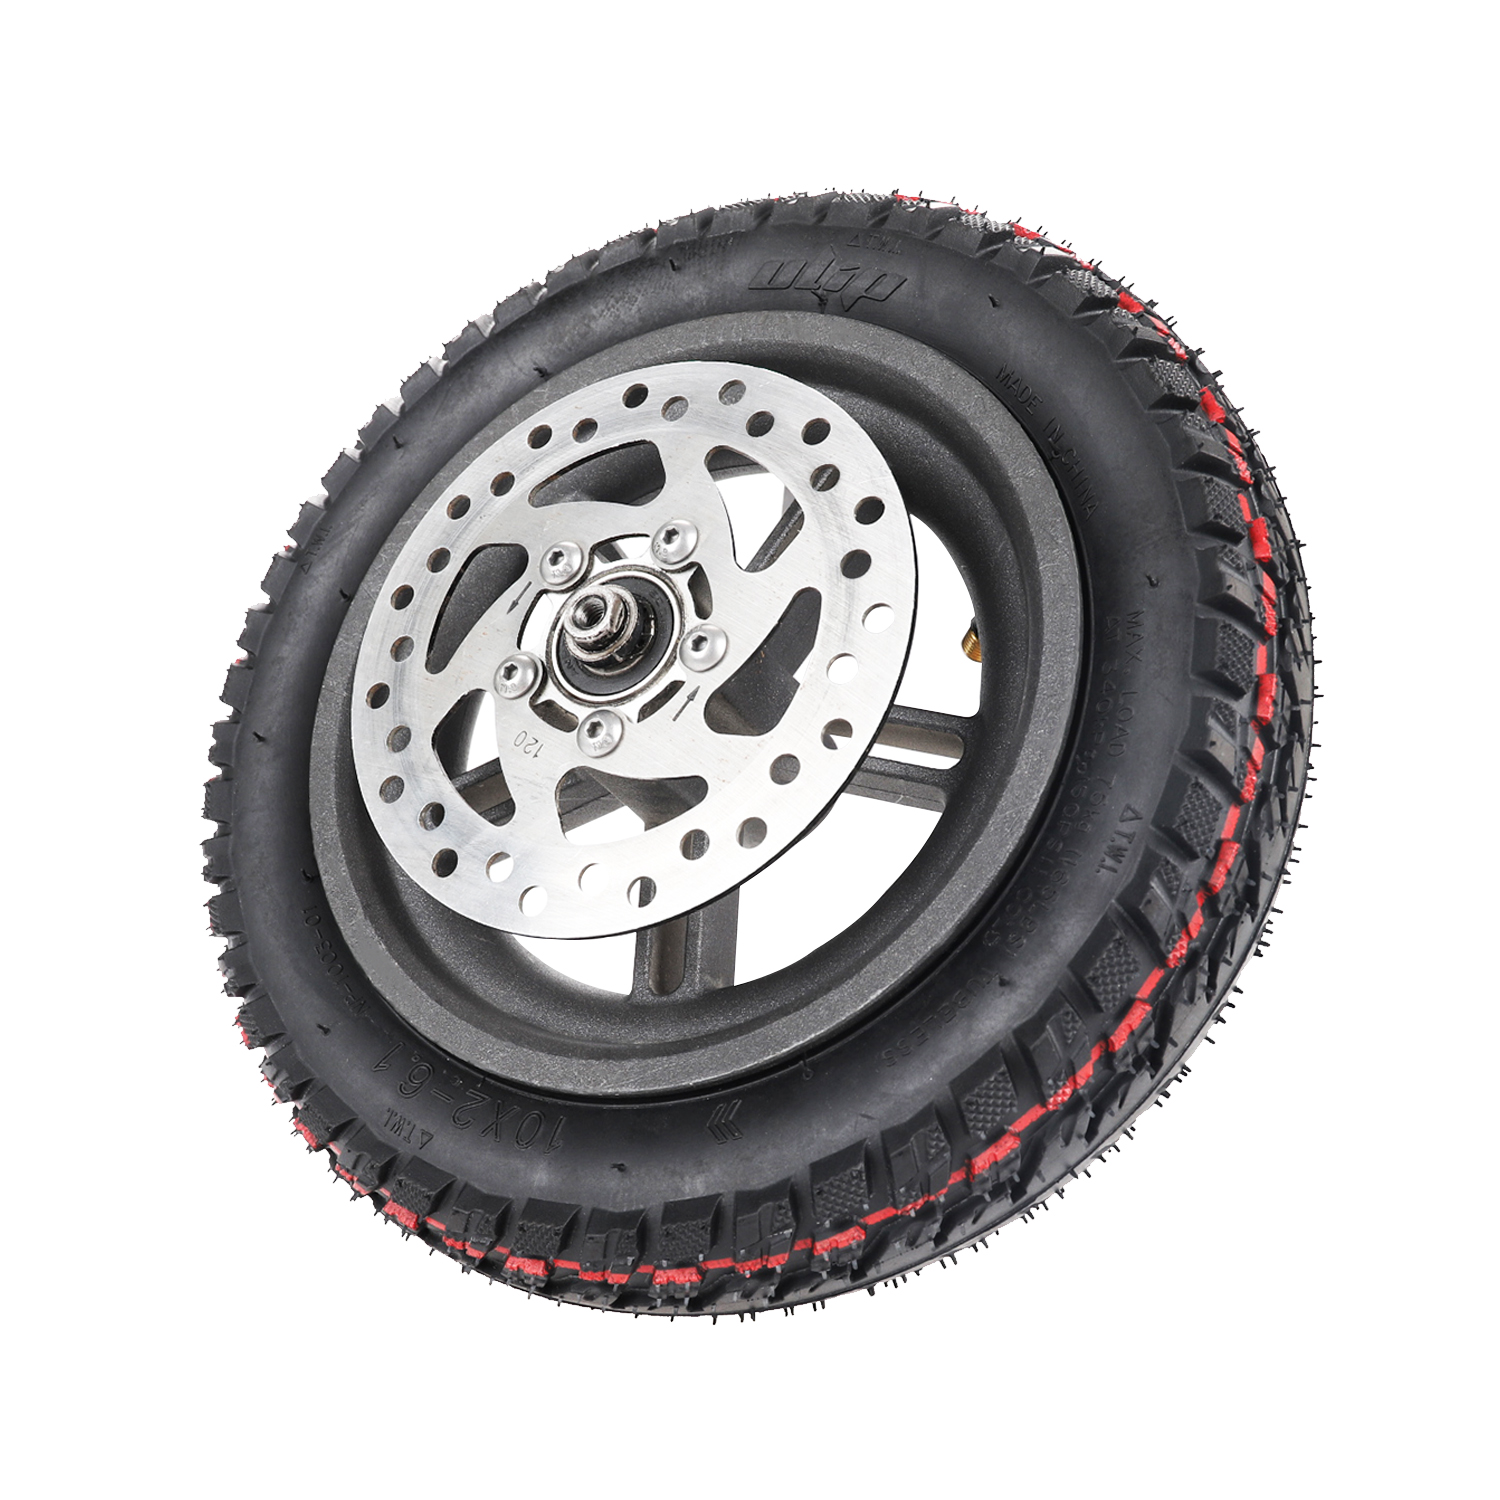 Find BIKIGHT 10*2-6.1 10 inch Electric Scooter Tyre High Performance E-Bike Off-Road Vacuum Outer Tires for Xiaomi M365/Pro/Pro2/1S/Xiaomi 3/Lite for Sale on Gipsybee.com with cryptocurrencies